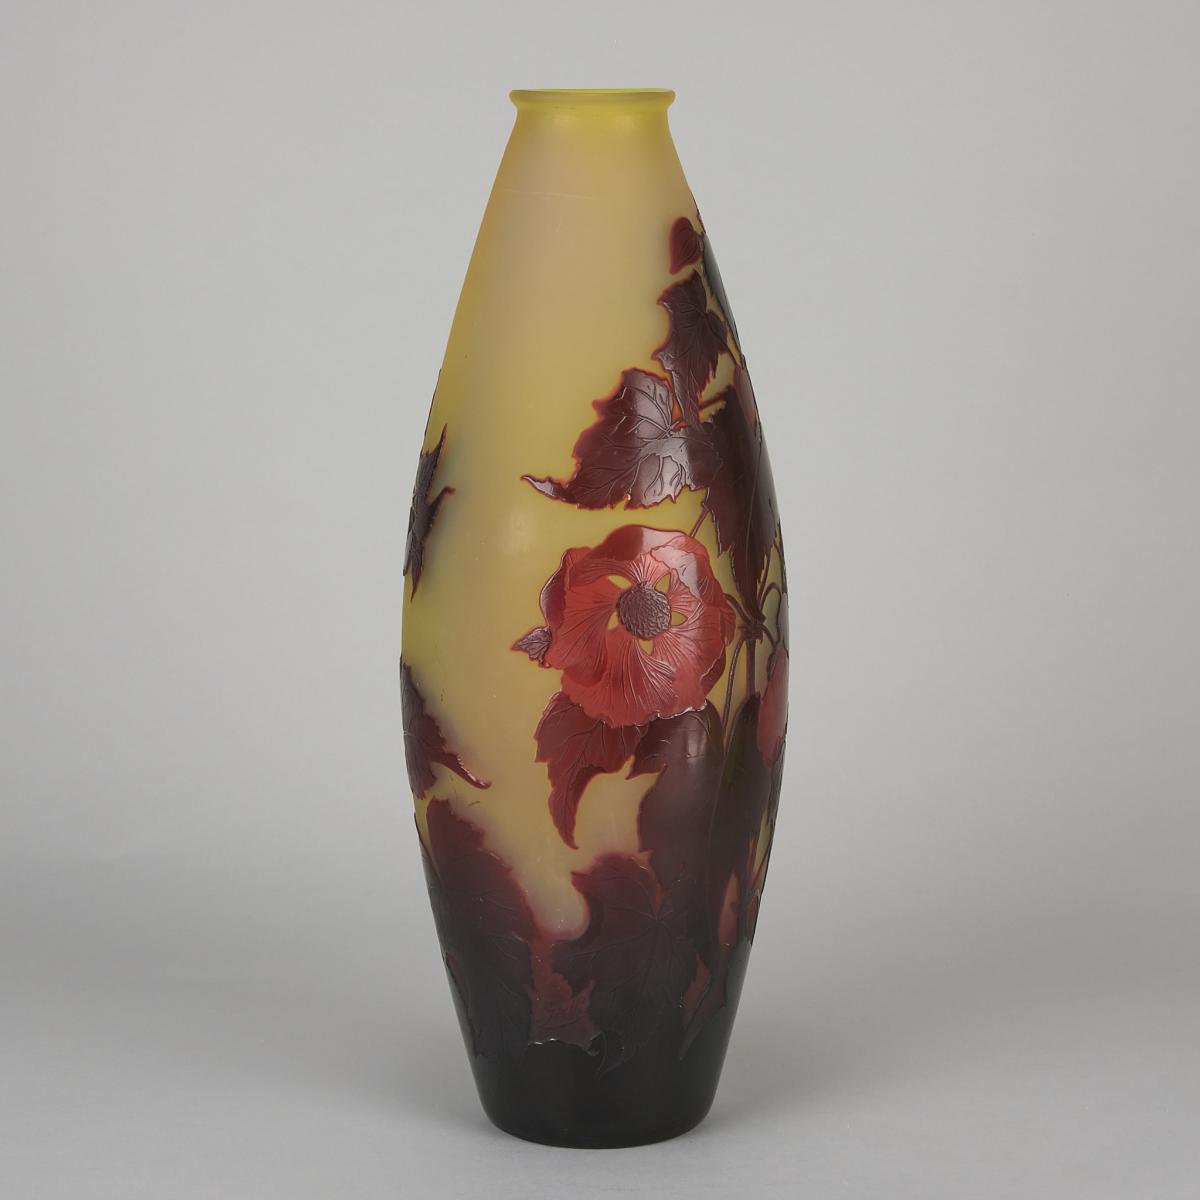 Early 20th Century French Art Nouveau Vase entitled "Large Floral Vase" by Emile Galle